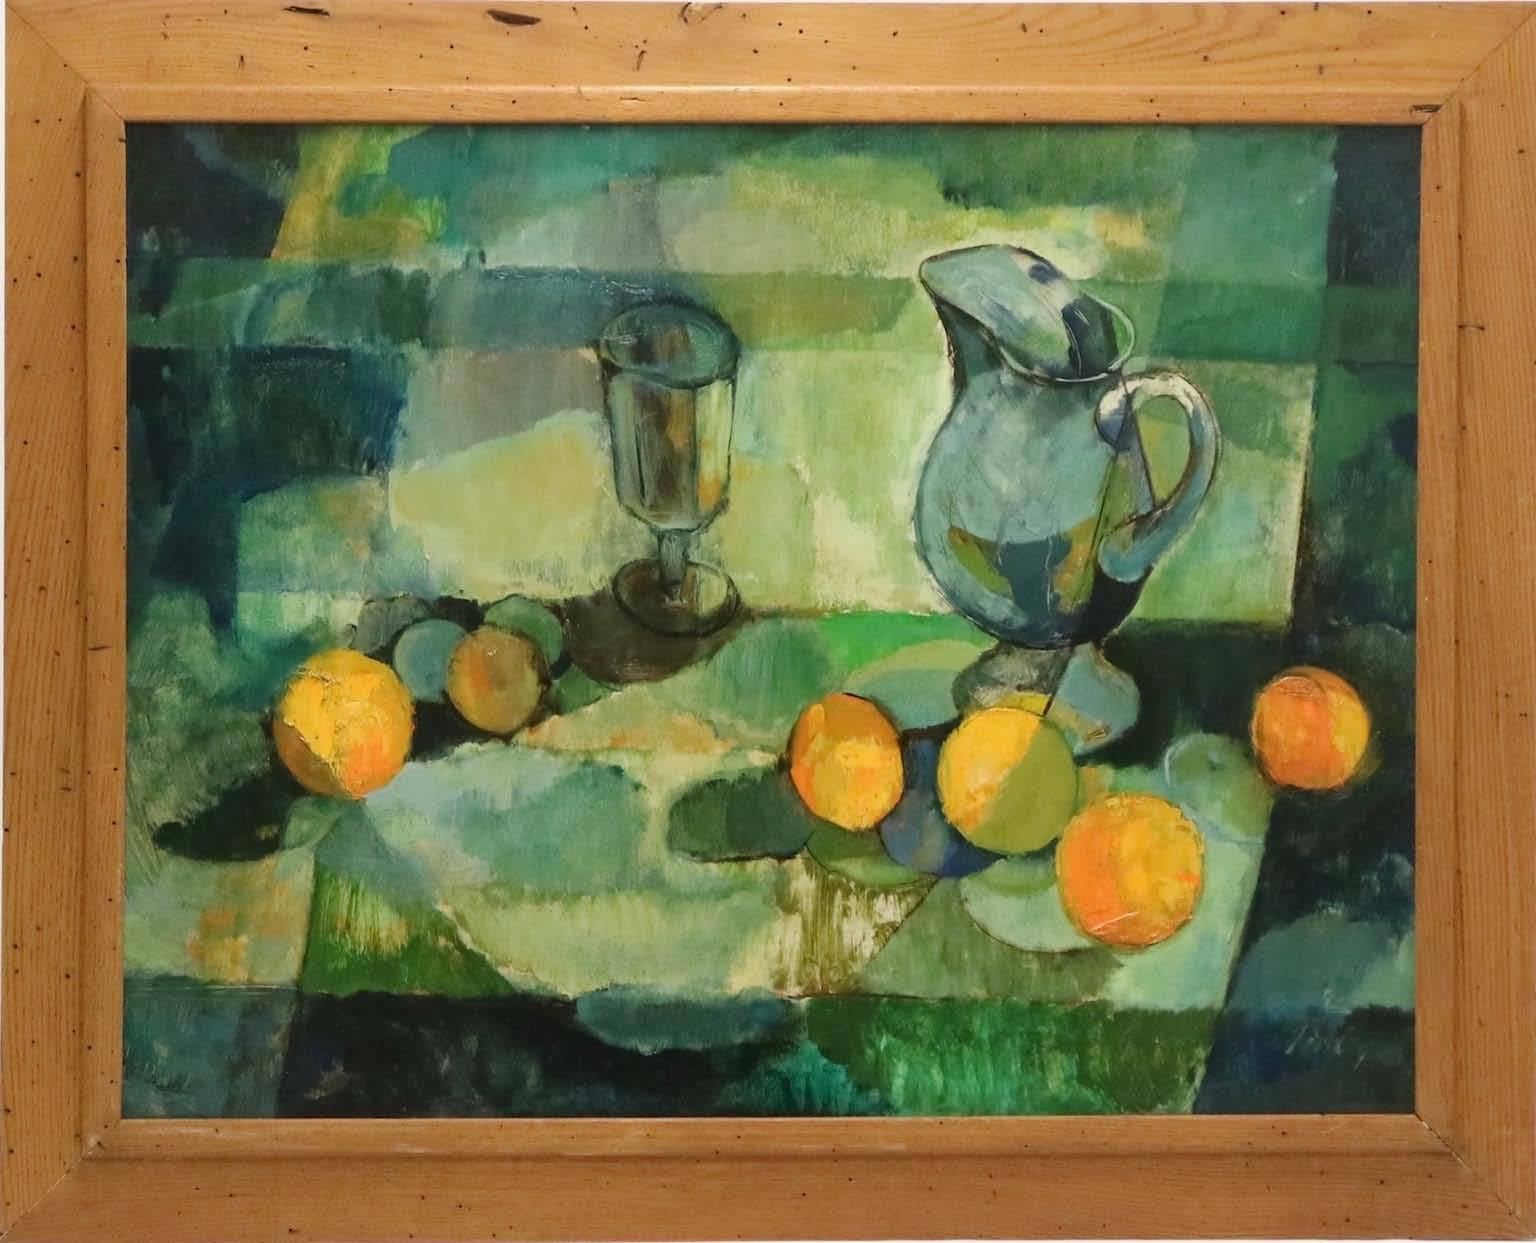 A still life in oil on masonite by American artist Dorothy Finley (20th Century), produced circa 1950s, depicting a pitcher, goblet and scattered oranges, rendered in the fauvist manner. Markings include the artist's signature to the bottom right